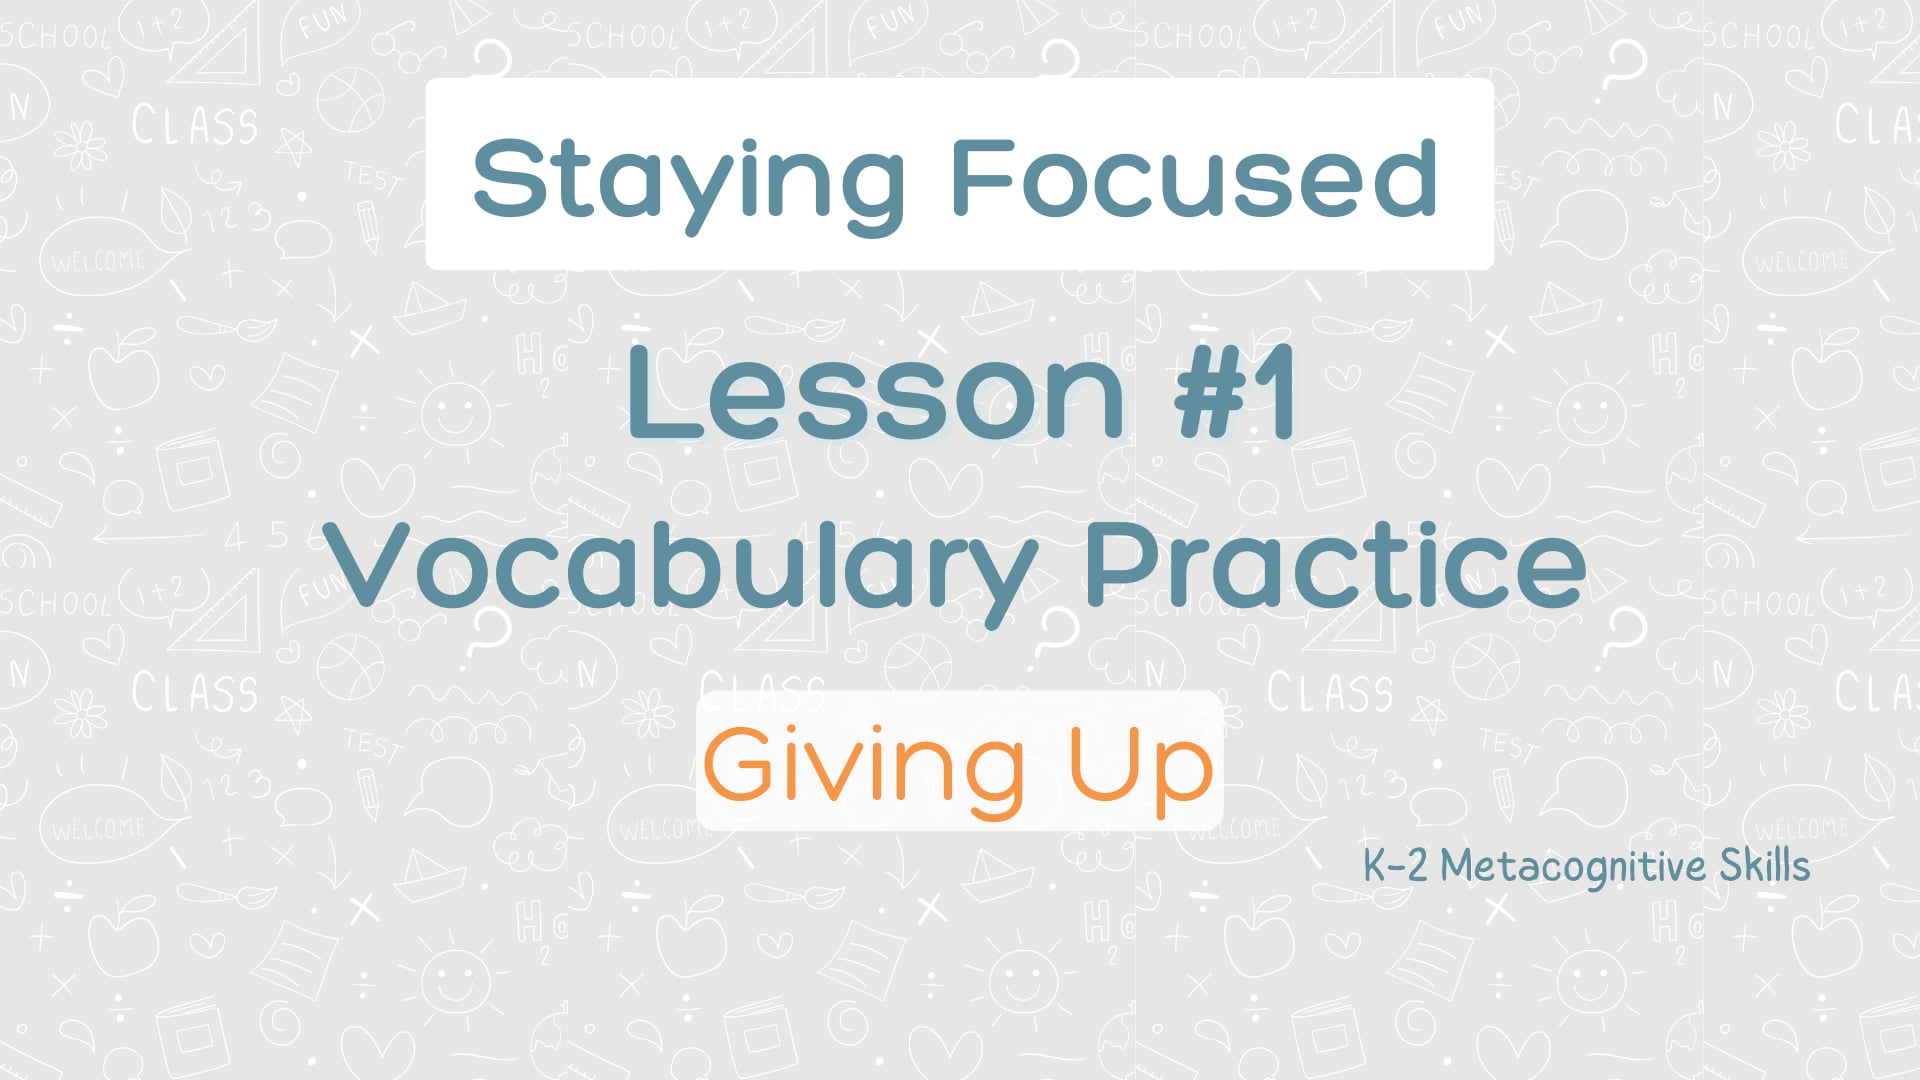 Lesson #1 Vocabulary Practice: Giving Up video thumbnail